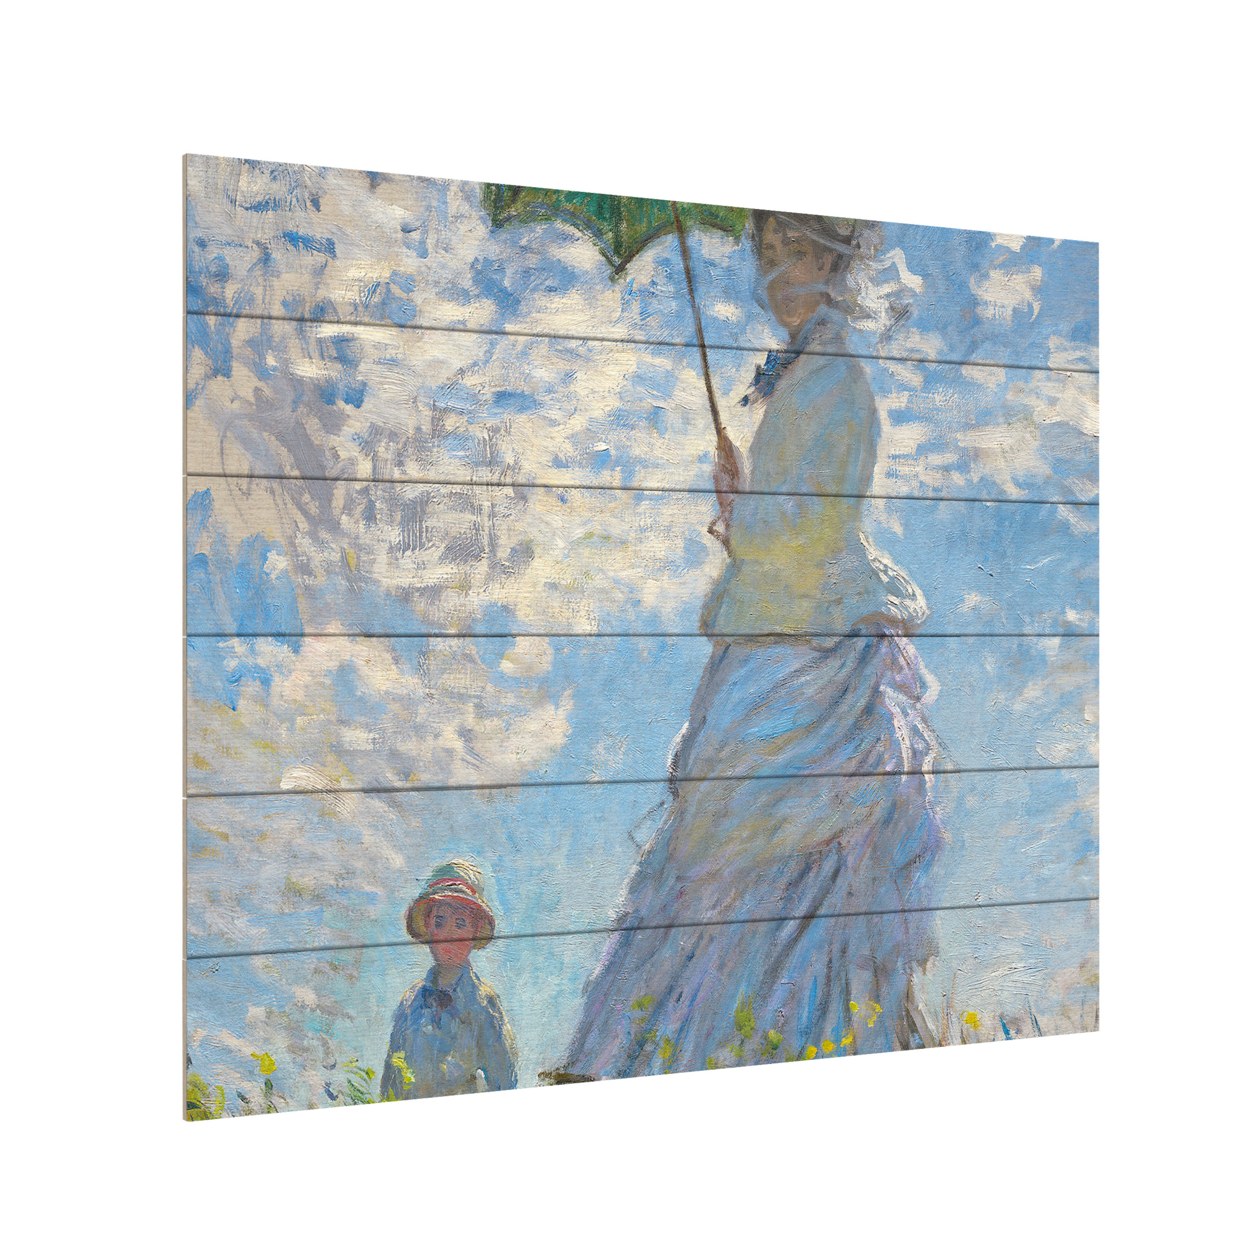 Wooden Slat Art 18 X 22 Inches Titled Woman With A Parasol 1875 Ready To Hang Home Decor Picture